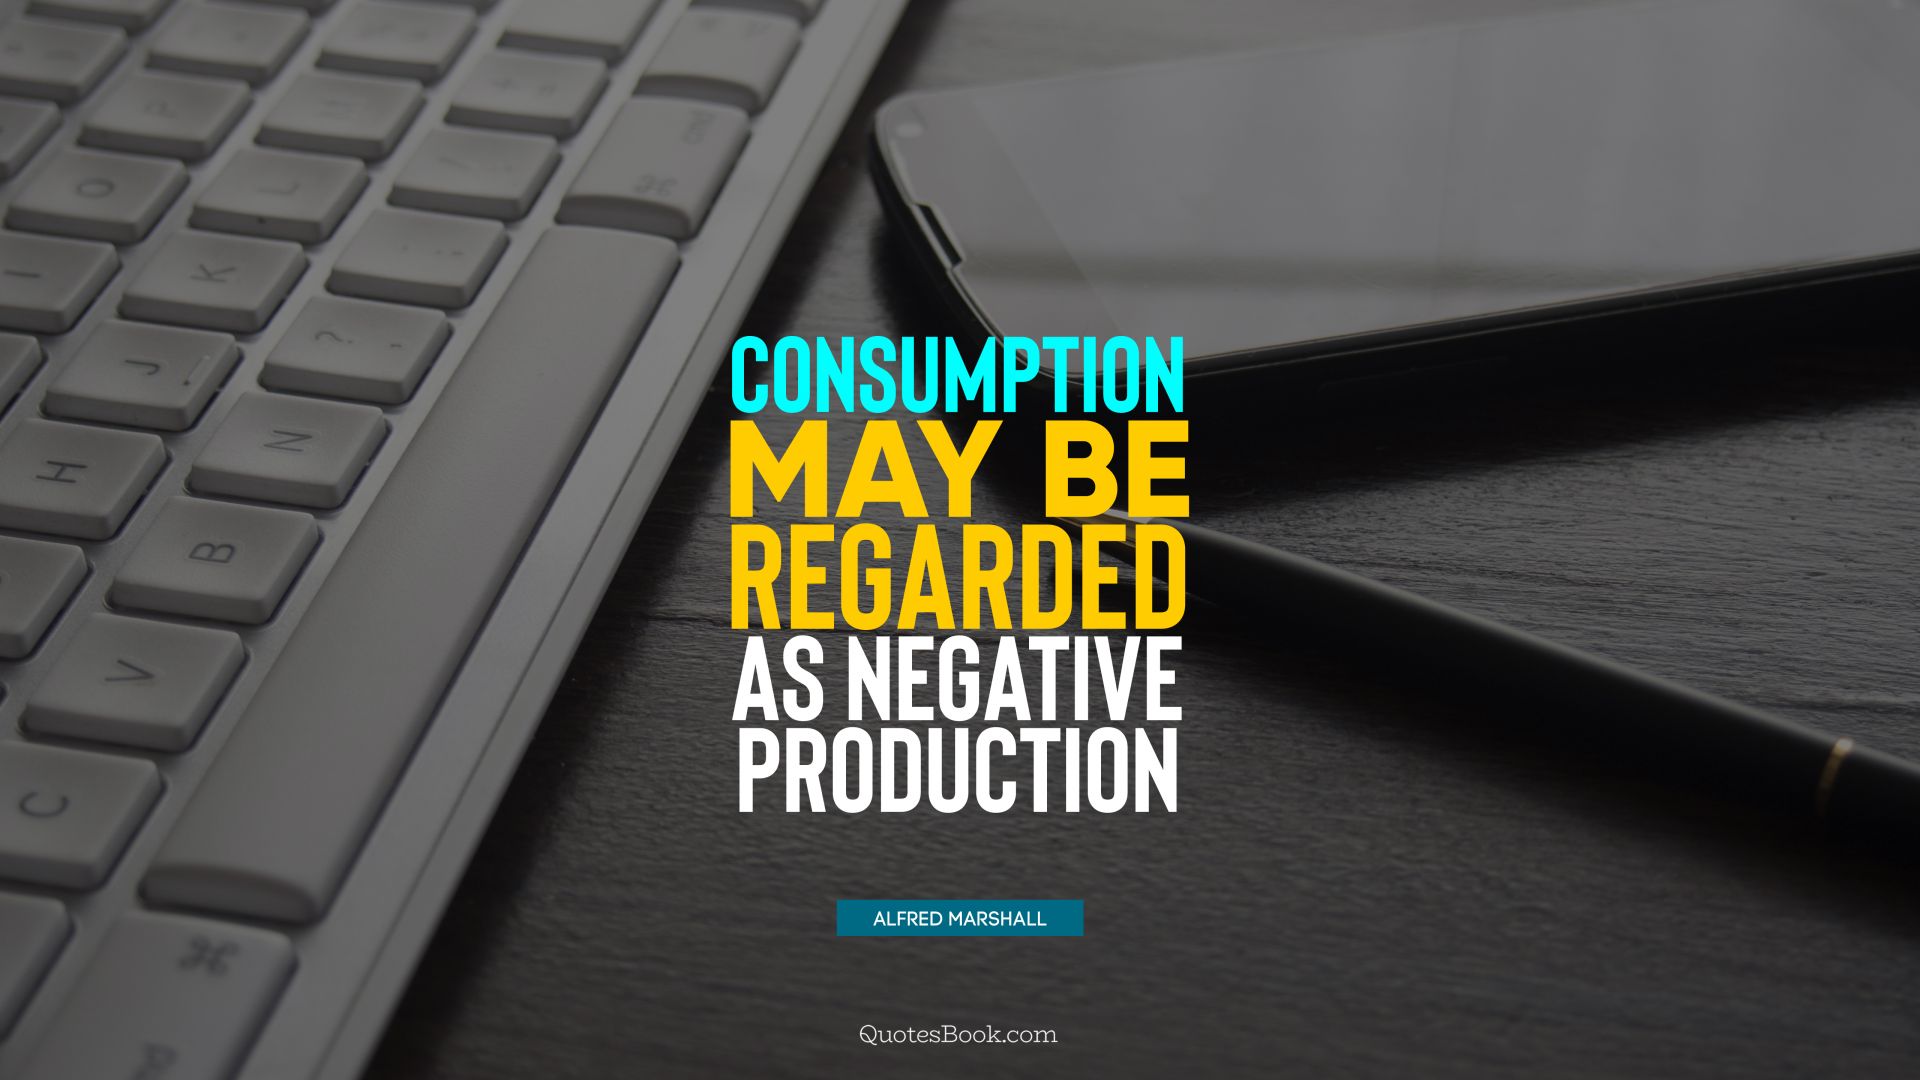 Consumption may be regarded as negative production. - Quote by Alfred Marshall